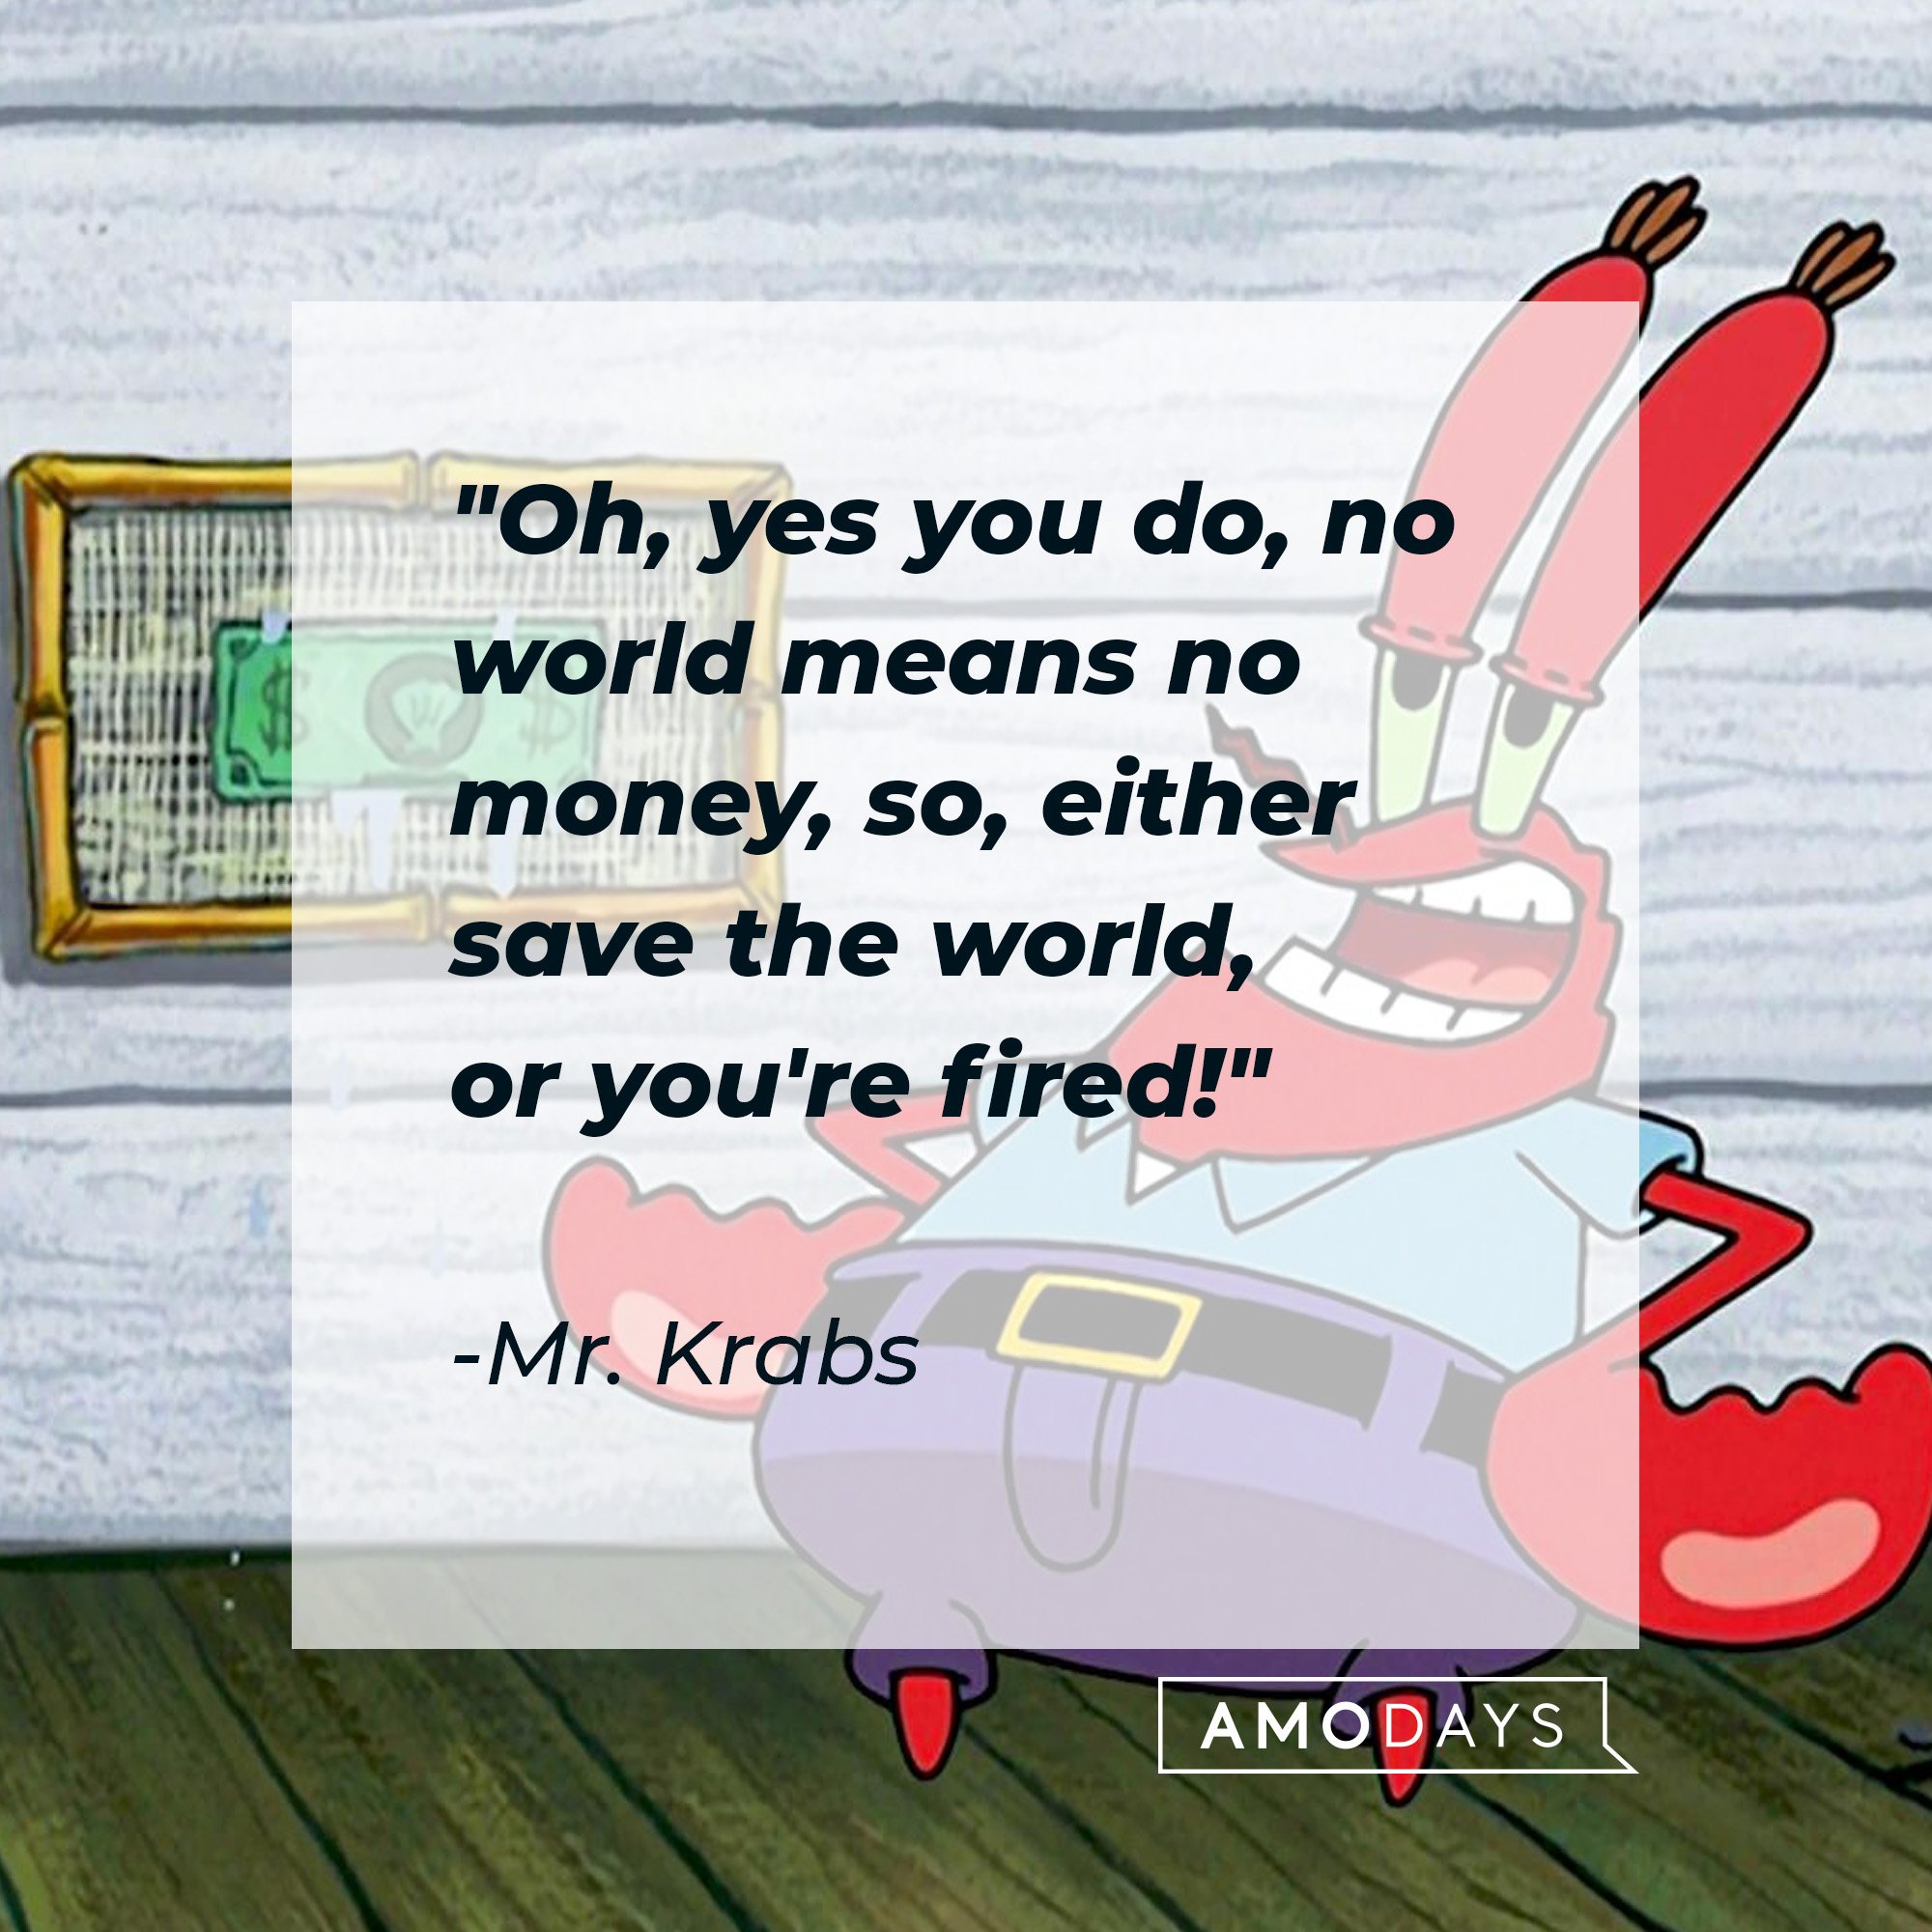 Mr. Krabs's quote:"Oh, yes you do, no world means no money, so, either save the world, or you're fired!" | Image: AmoDays 